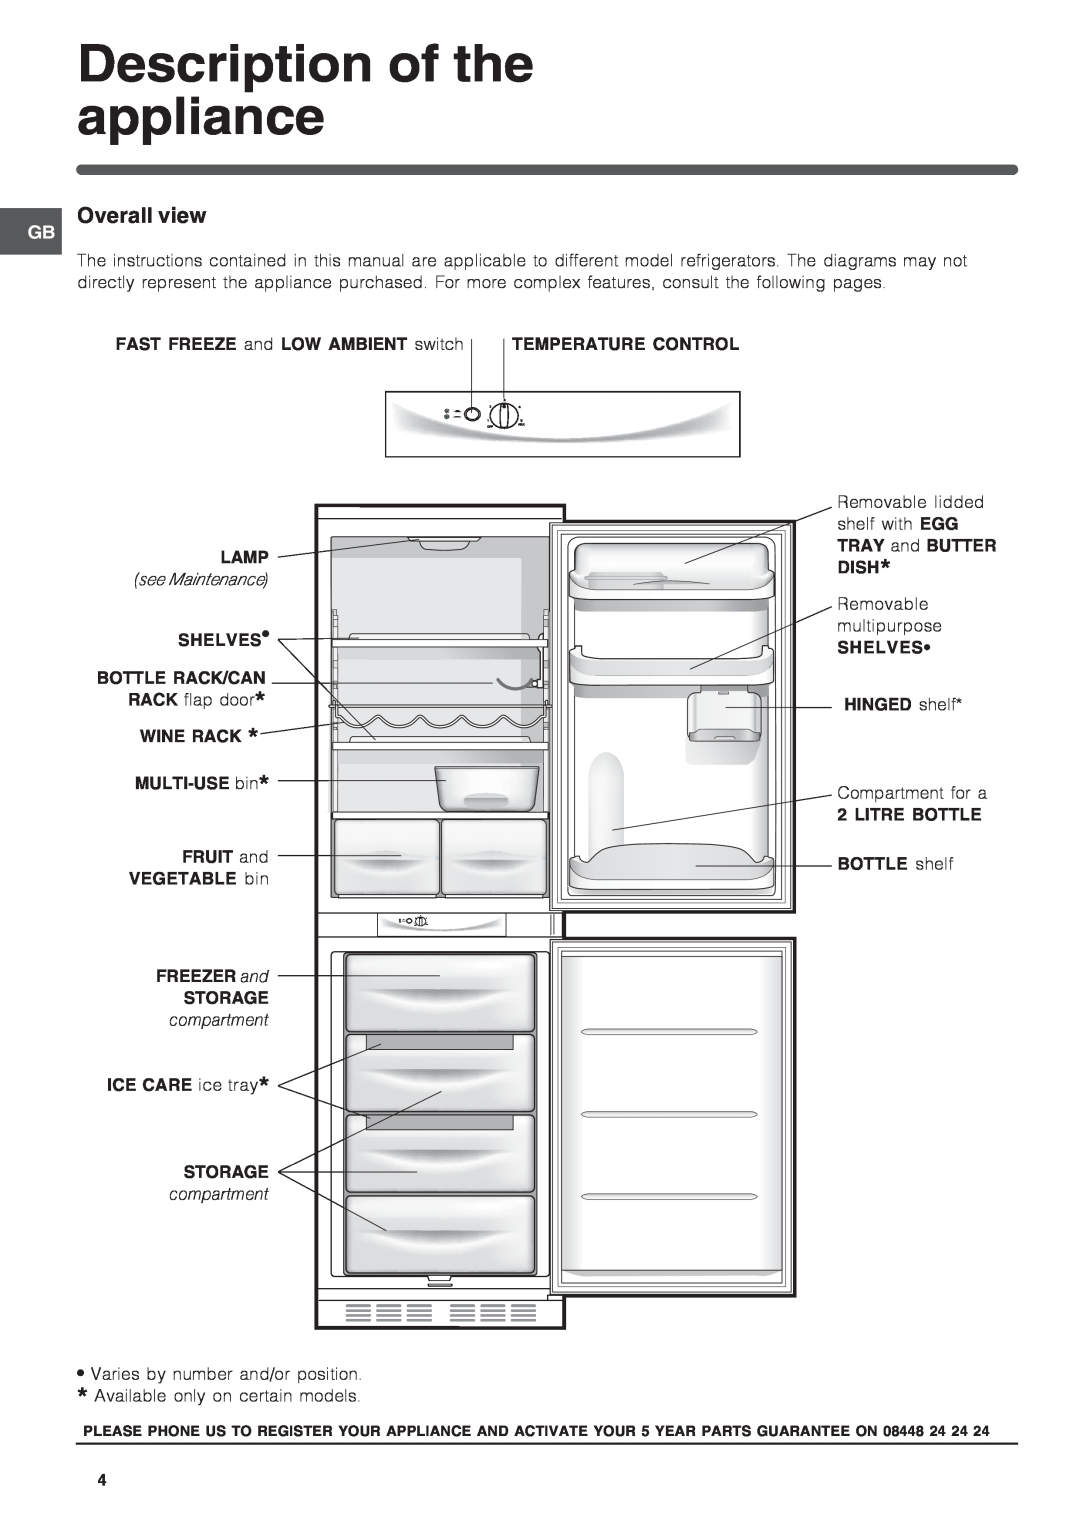 Hotpoint hm315x f operating instructions Description of the appliance, Overall view, see Maintenance, compartment 